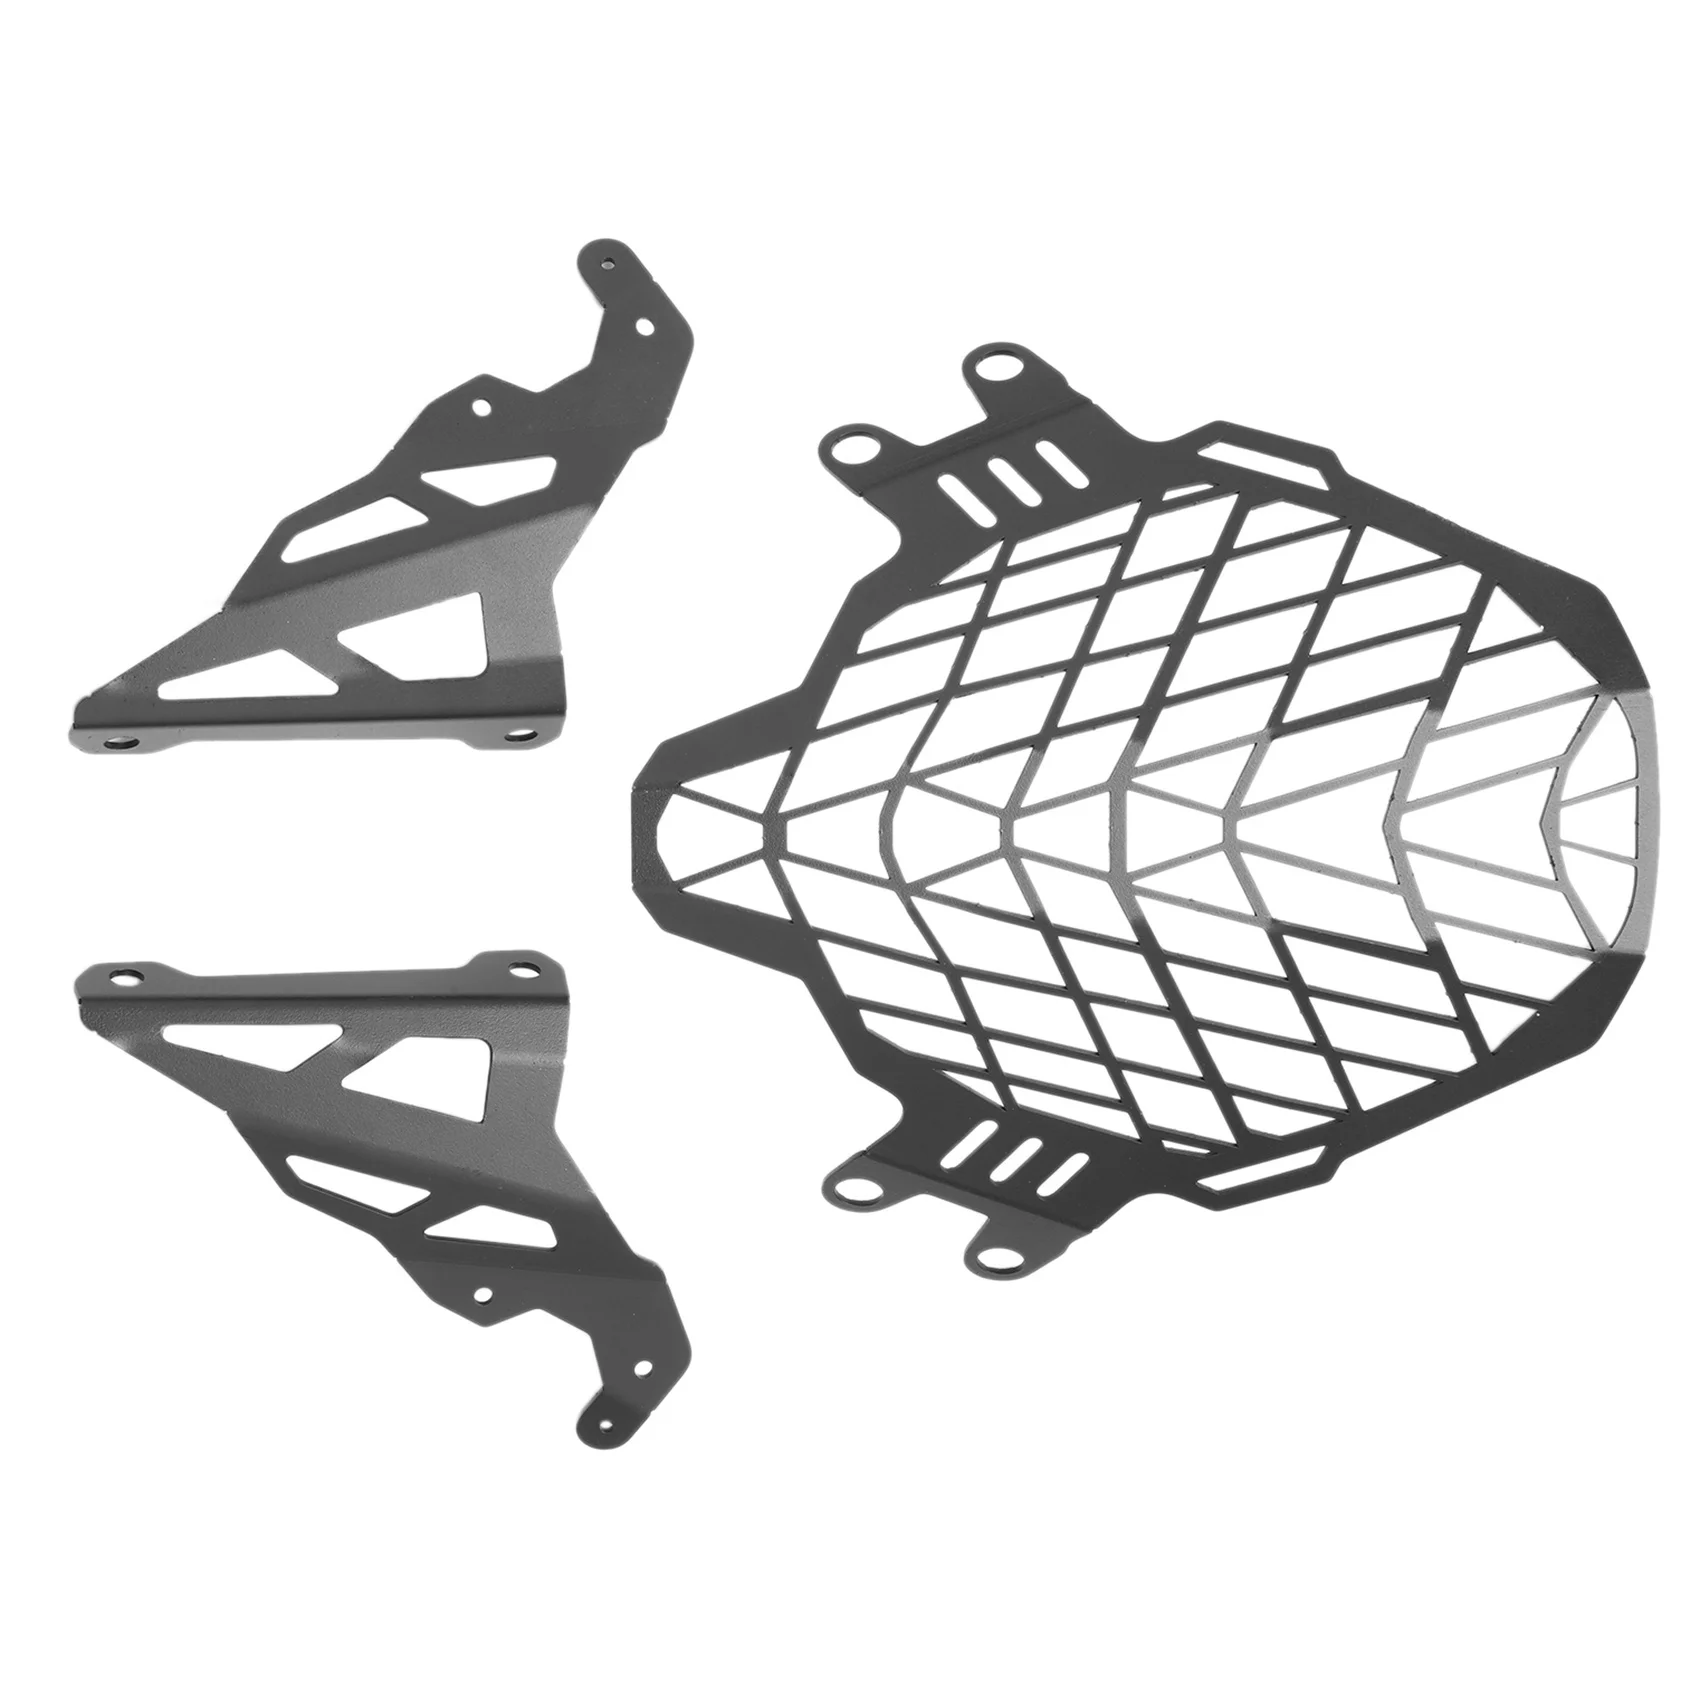 

Motorcycle Headlight Head Light Guard Protector Cover Protection Grill for SUZUKI DL650 V-Strom DL 650 Vstrom 650